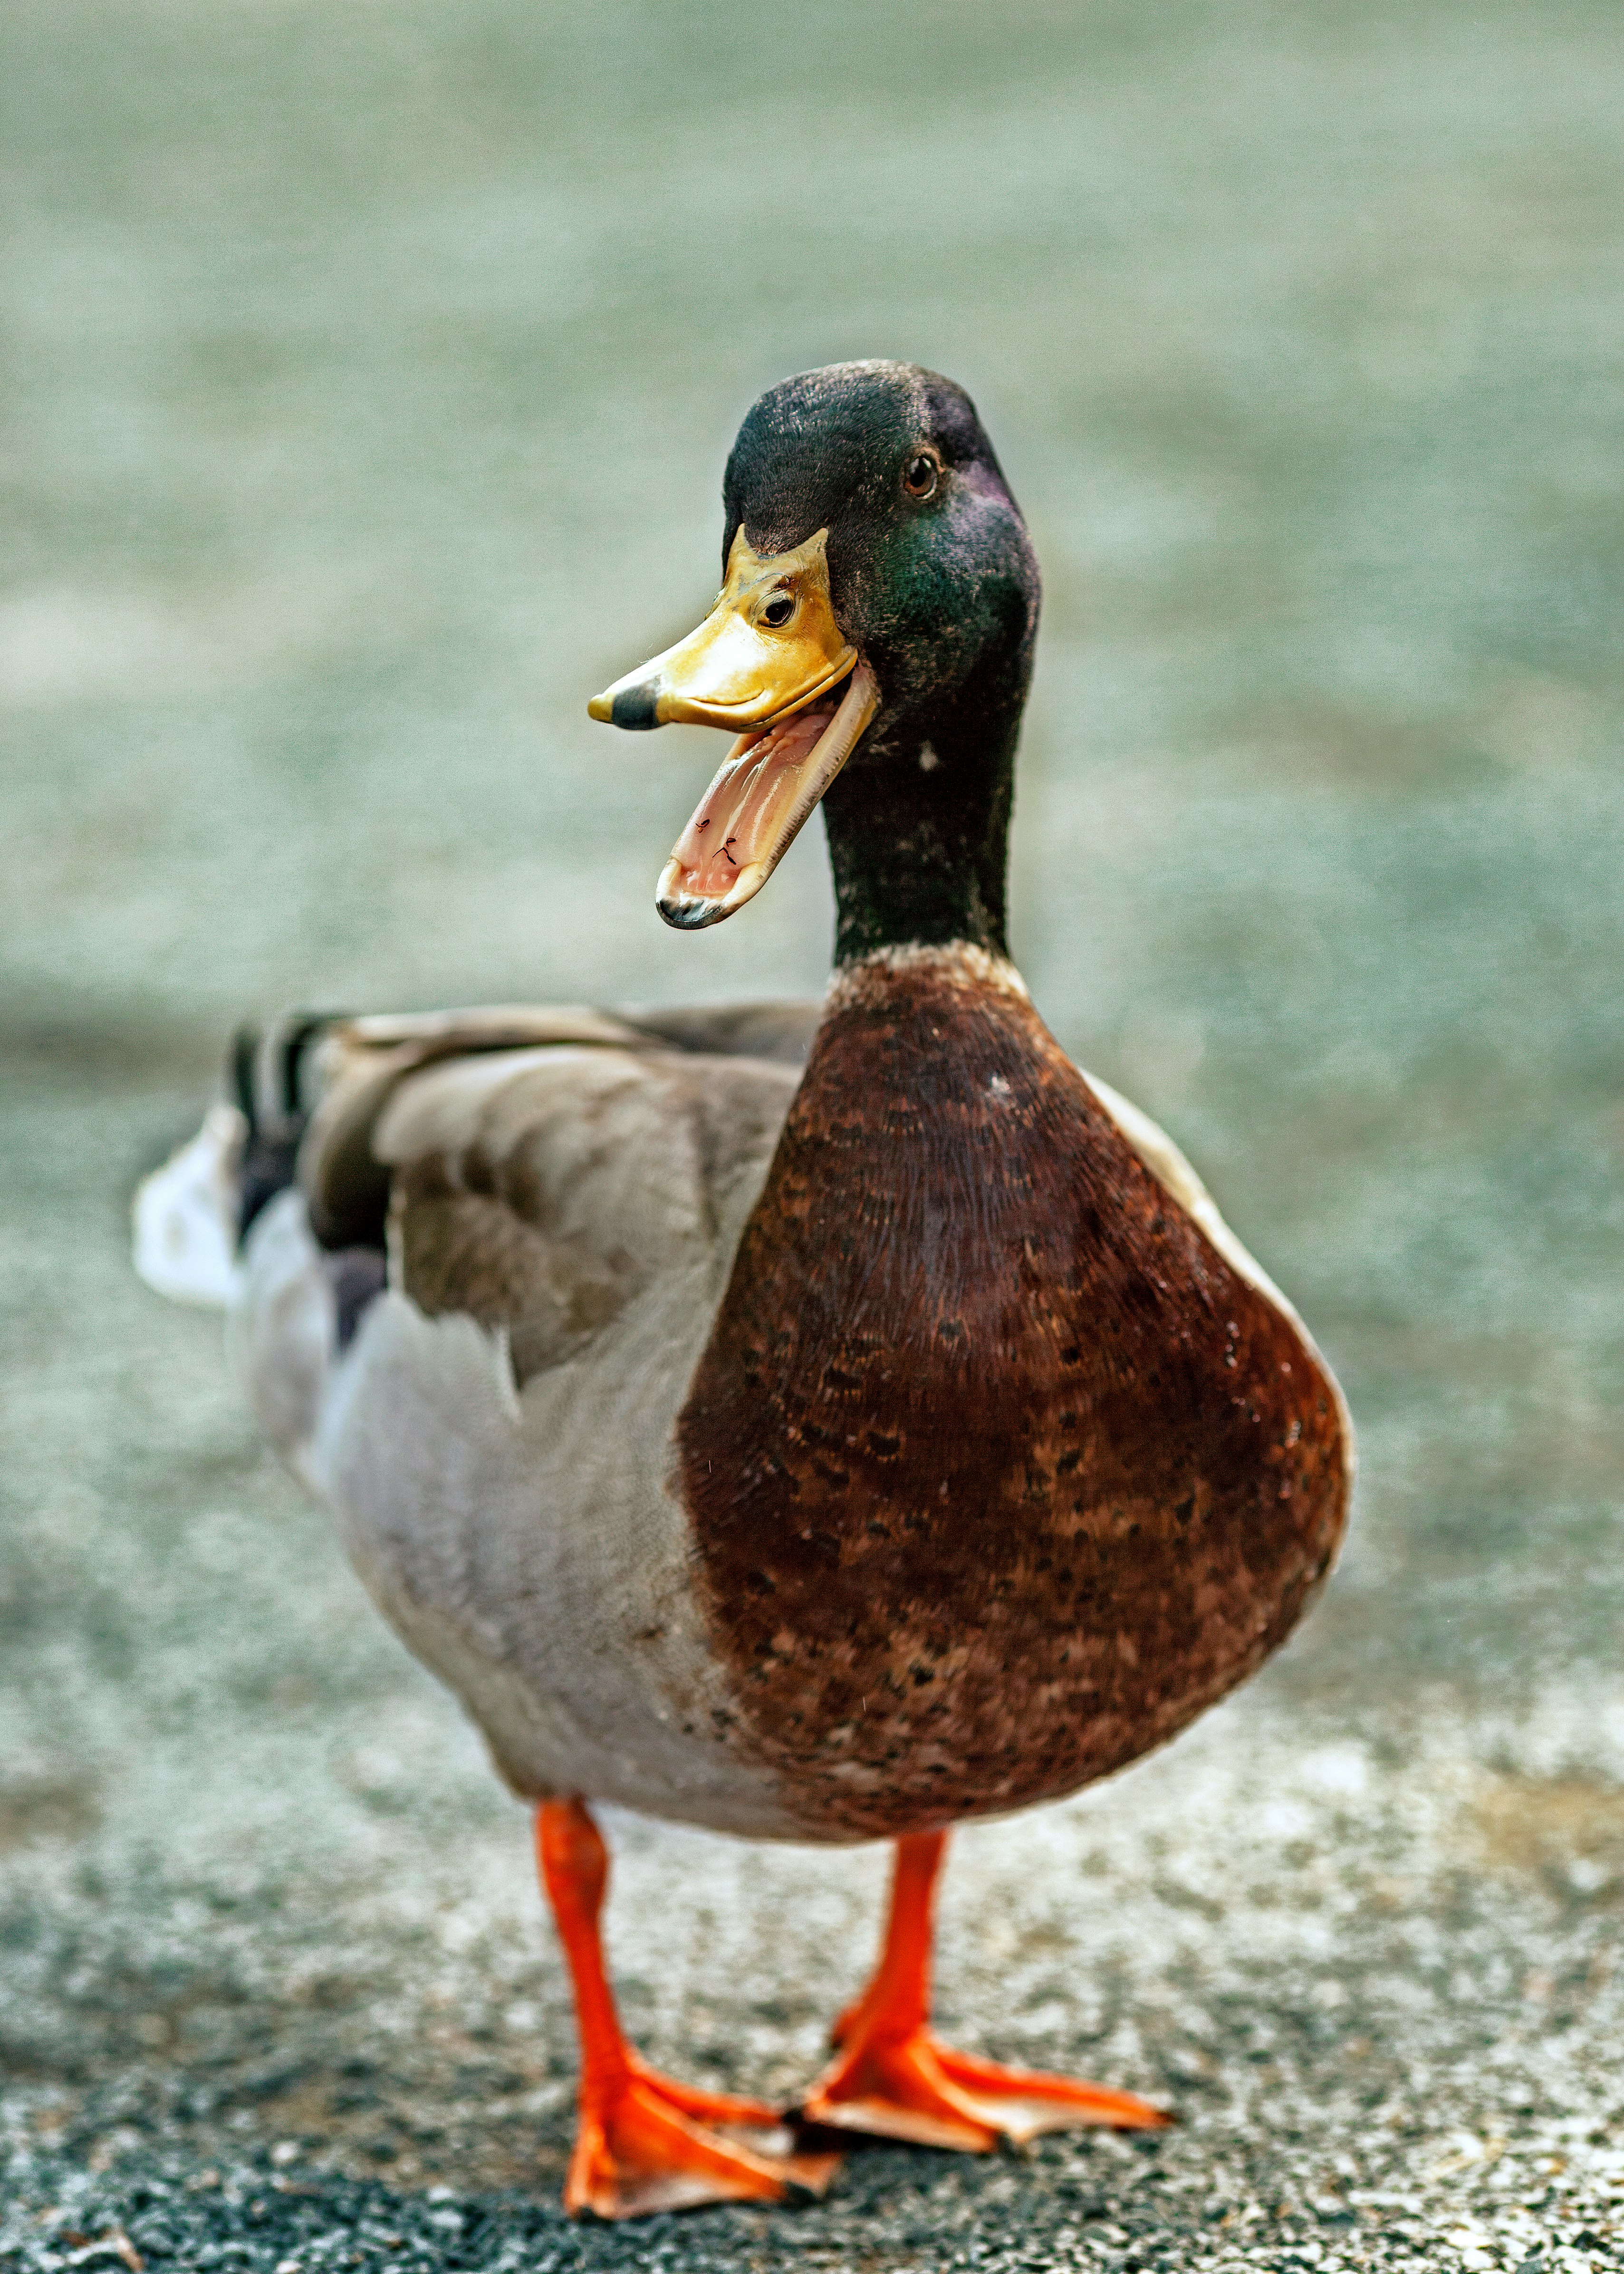 Here is a duck~